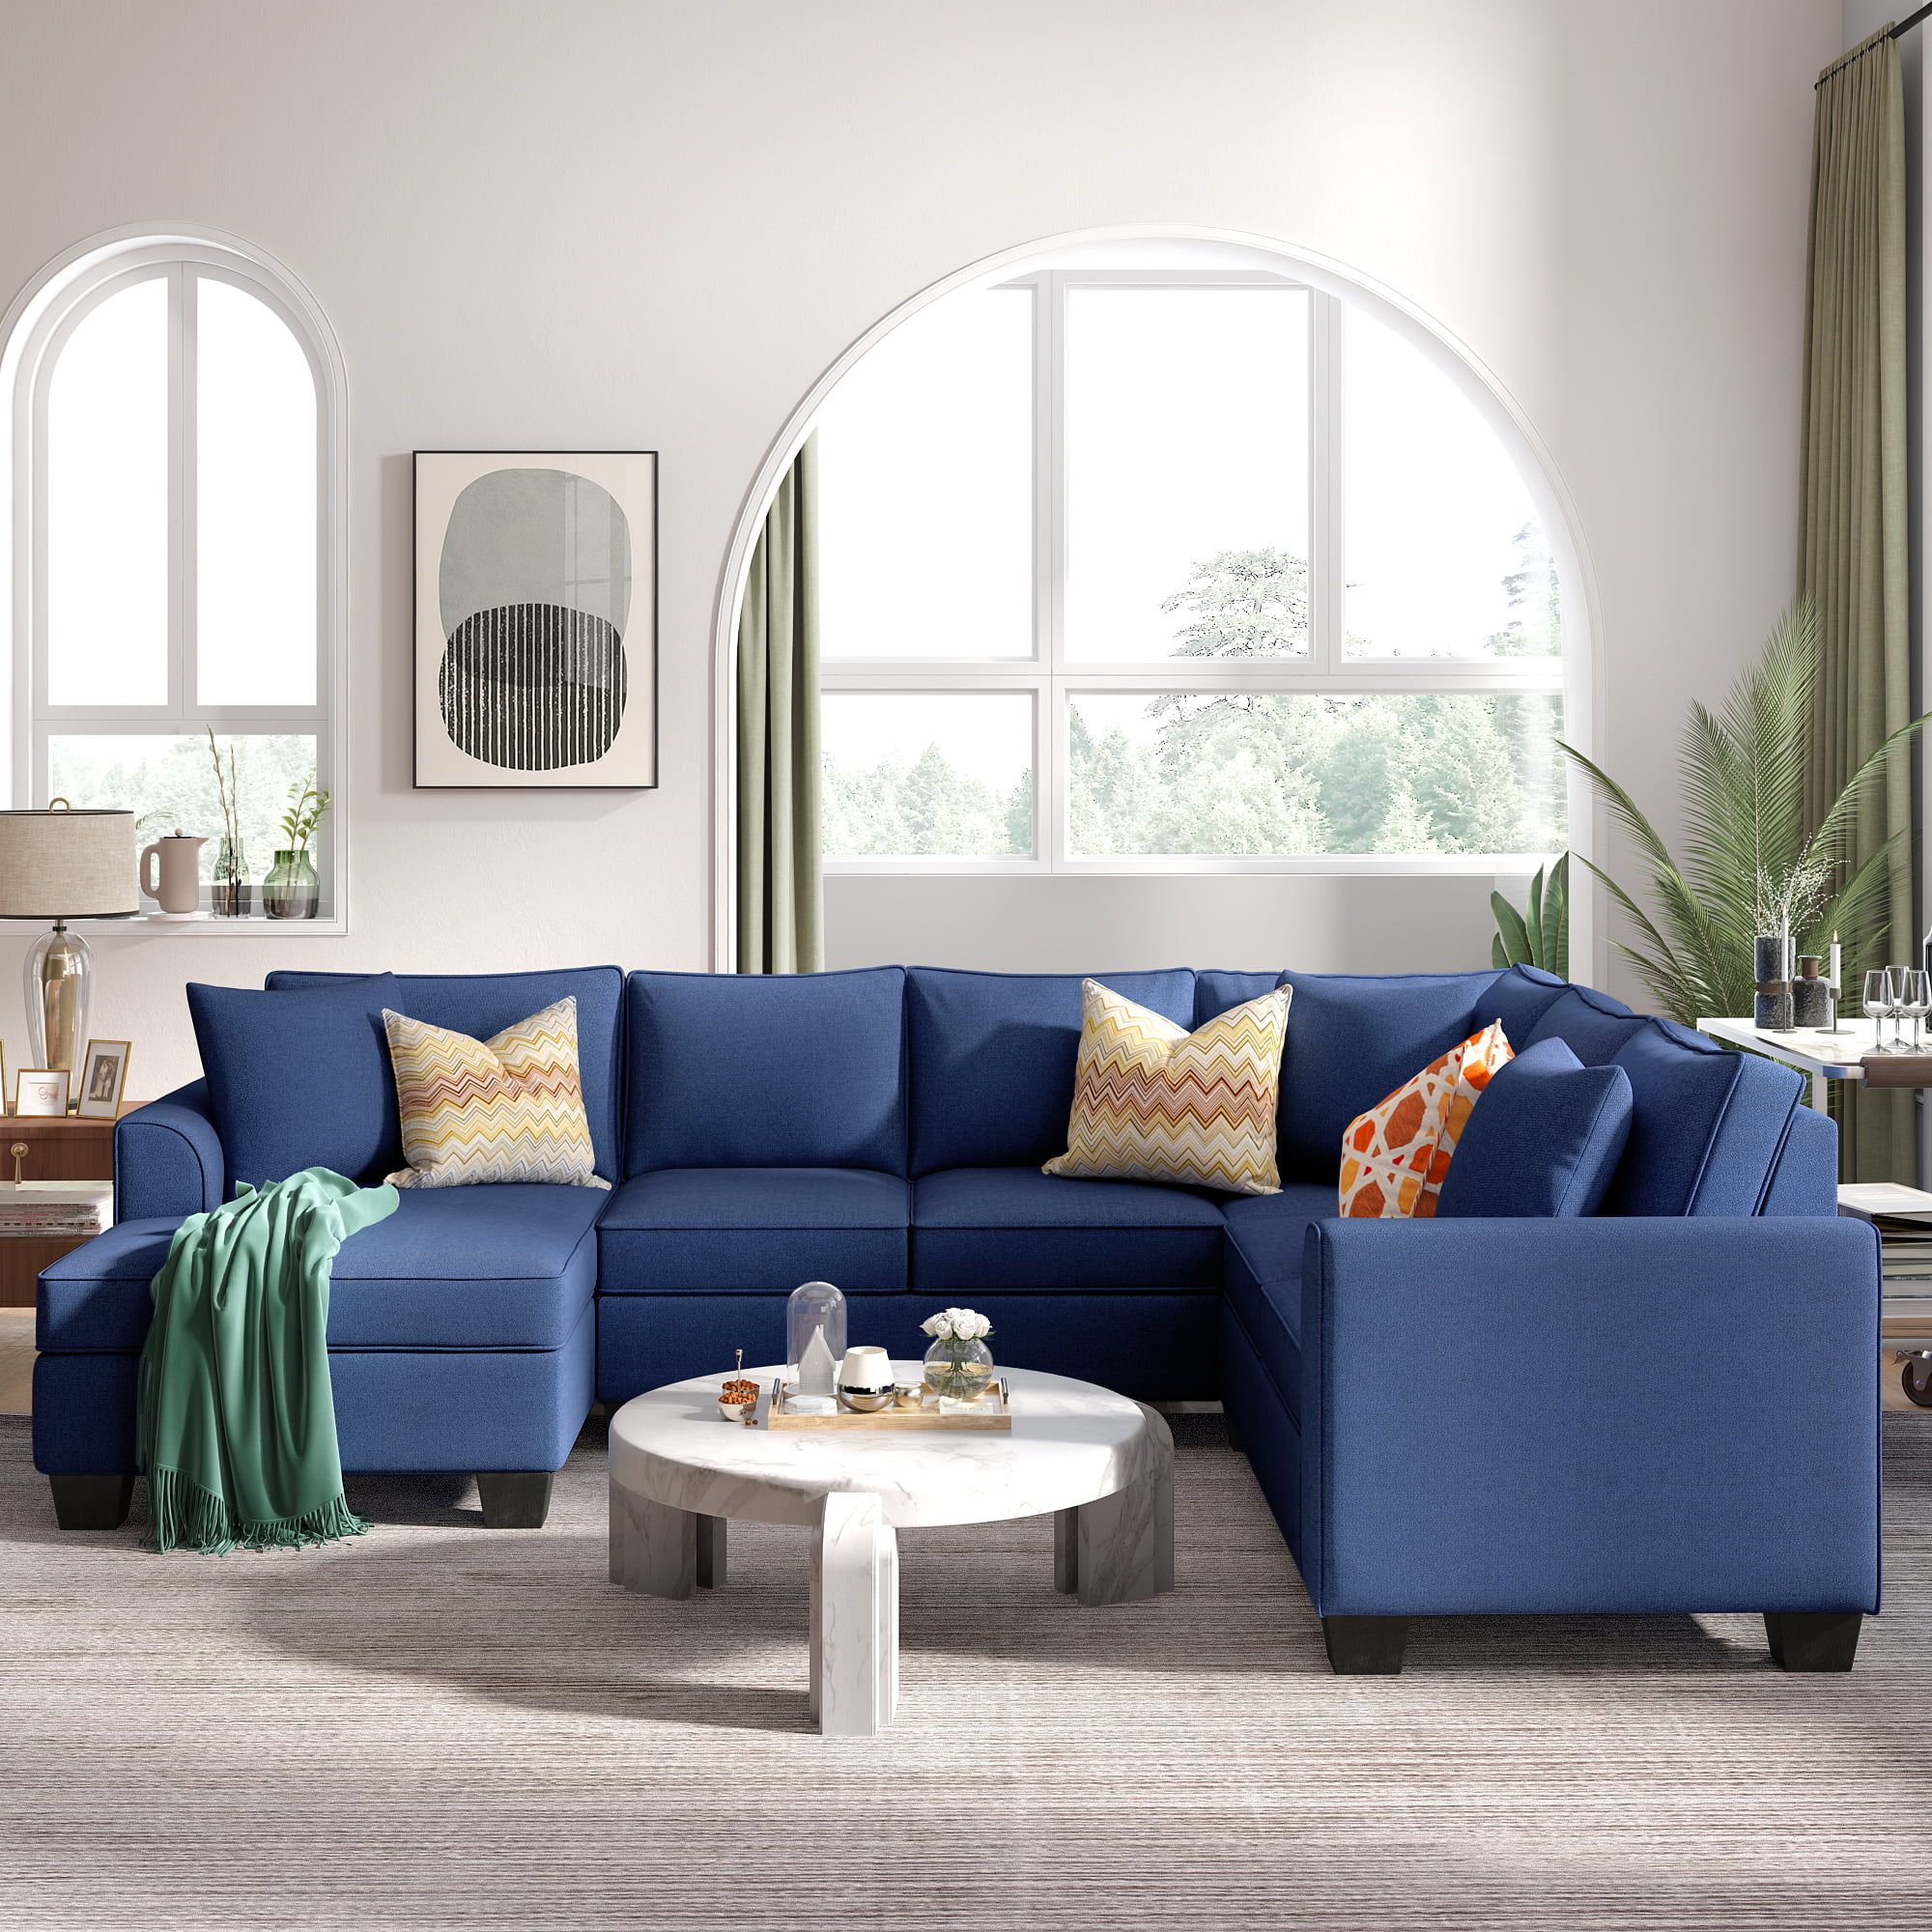 7 Seater Sectional Sofa Sets, Upholstered Modern U Shaped Sofa With 3  Pillows For Living Room, Blue – Walmart Throughout 7 Seater Sectional Couch With Ottoman And 3 Pillows (View 7 of 20)